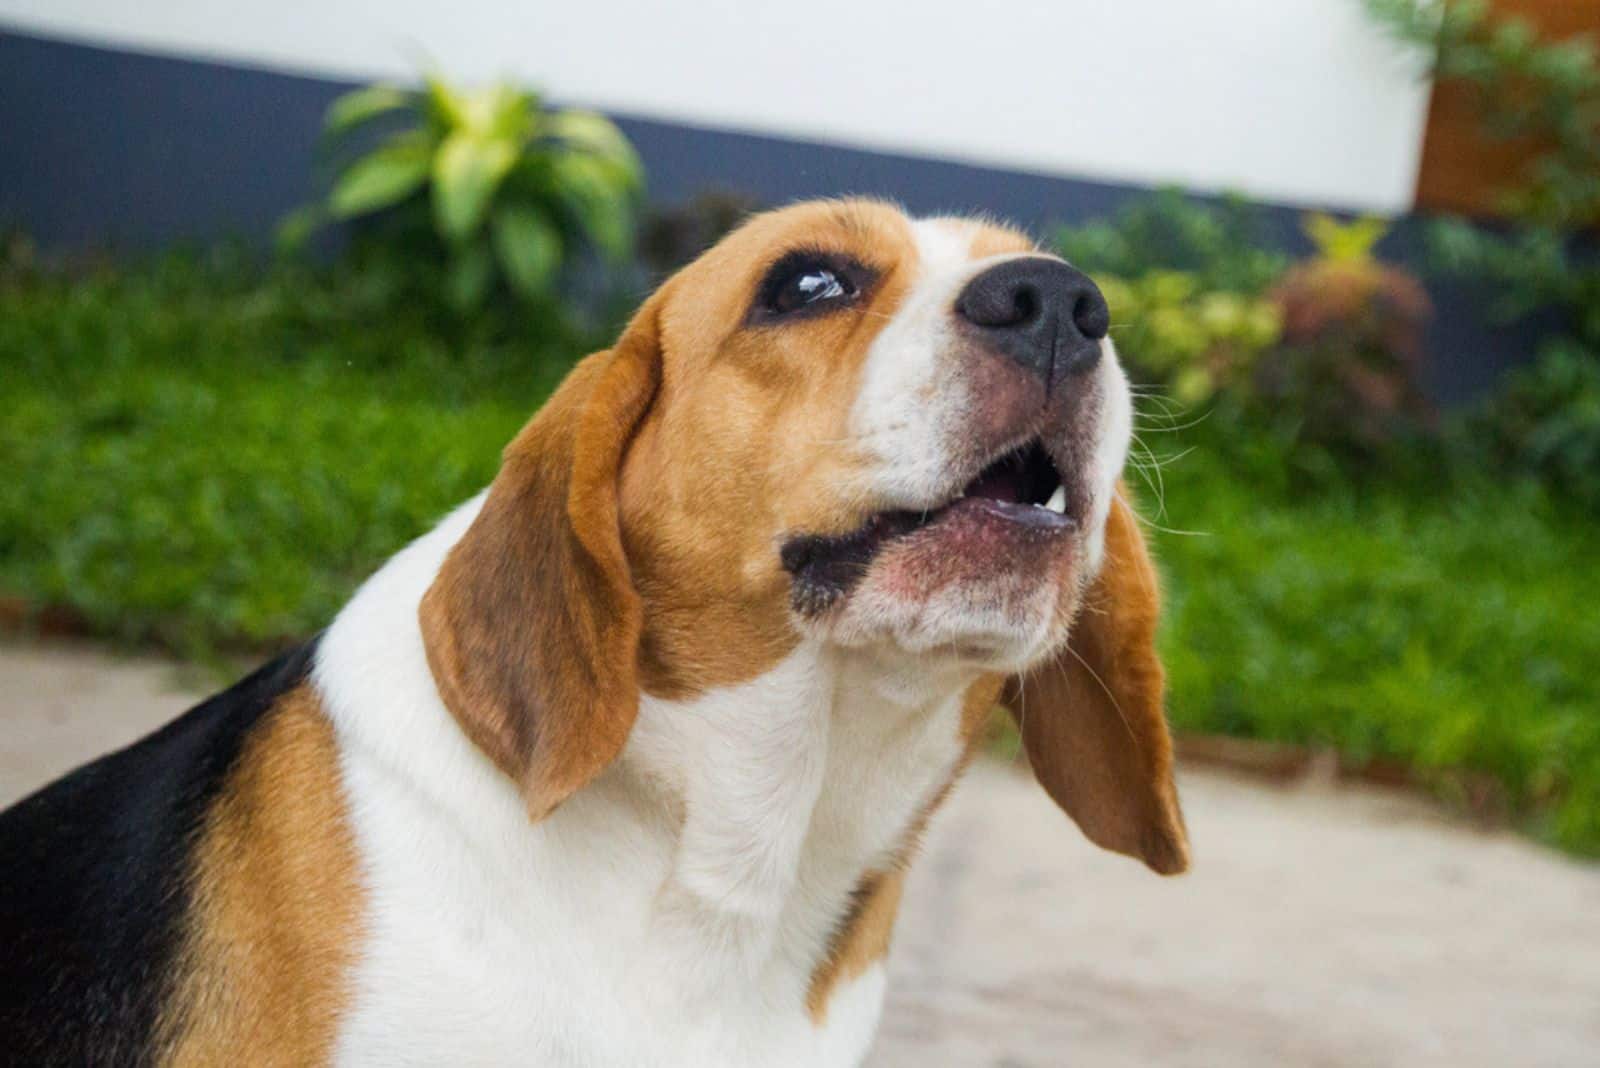 16 Dog Breeds That Whine A Lot: Still, We Love Them